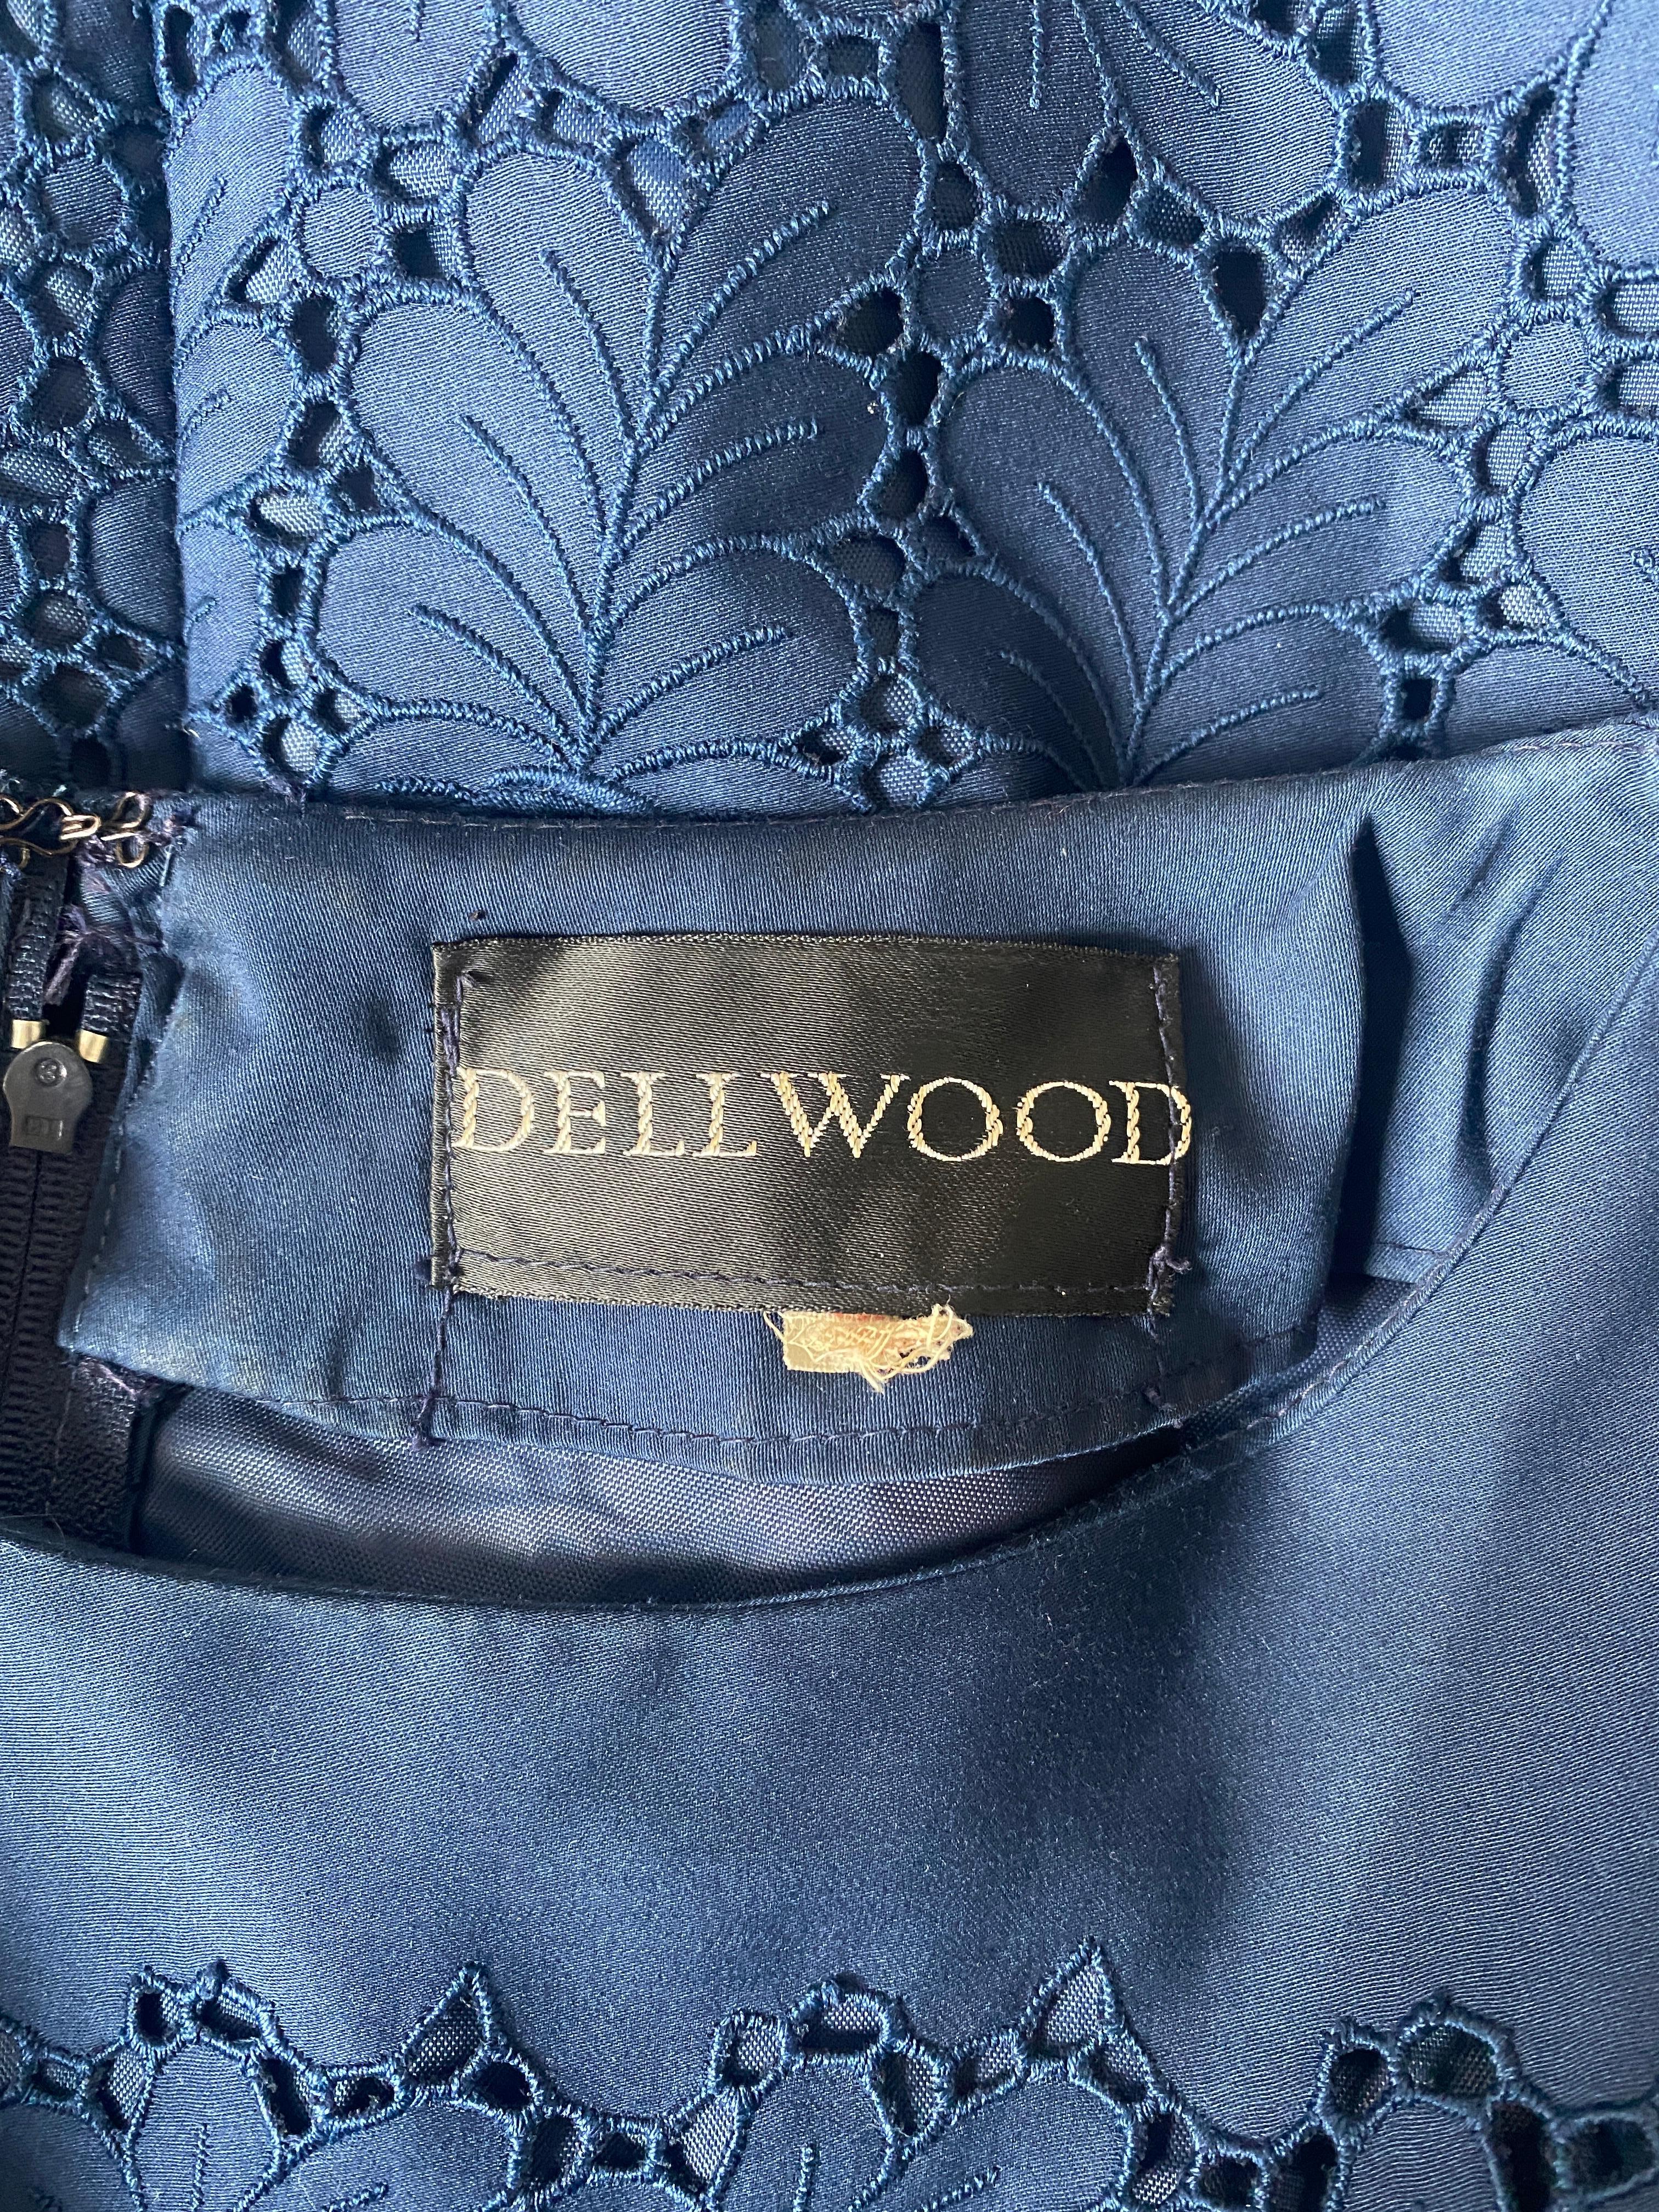 1960s Dellwood Navy Floral Cutout Dress For Sale 2